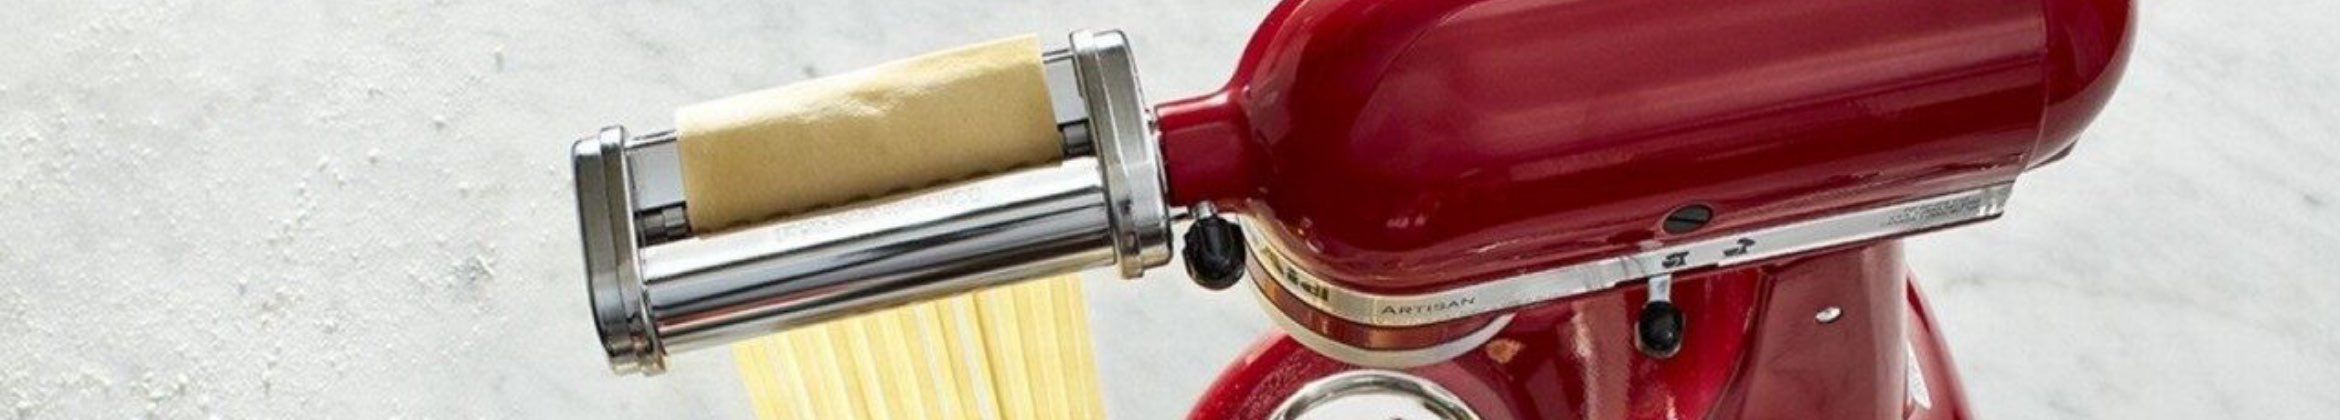 A KitchenAid Stand Mixer with Pasta Roller and Cutter Set